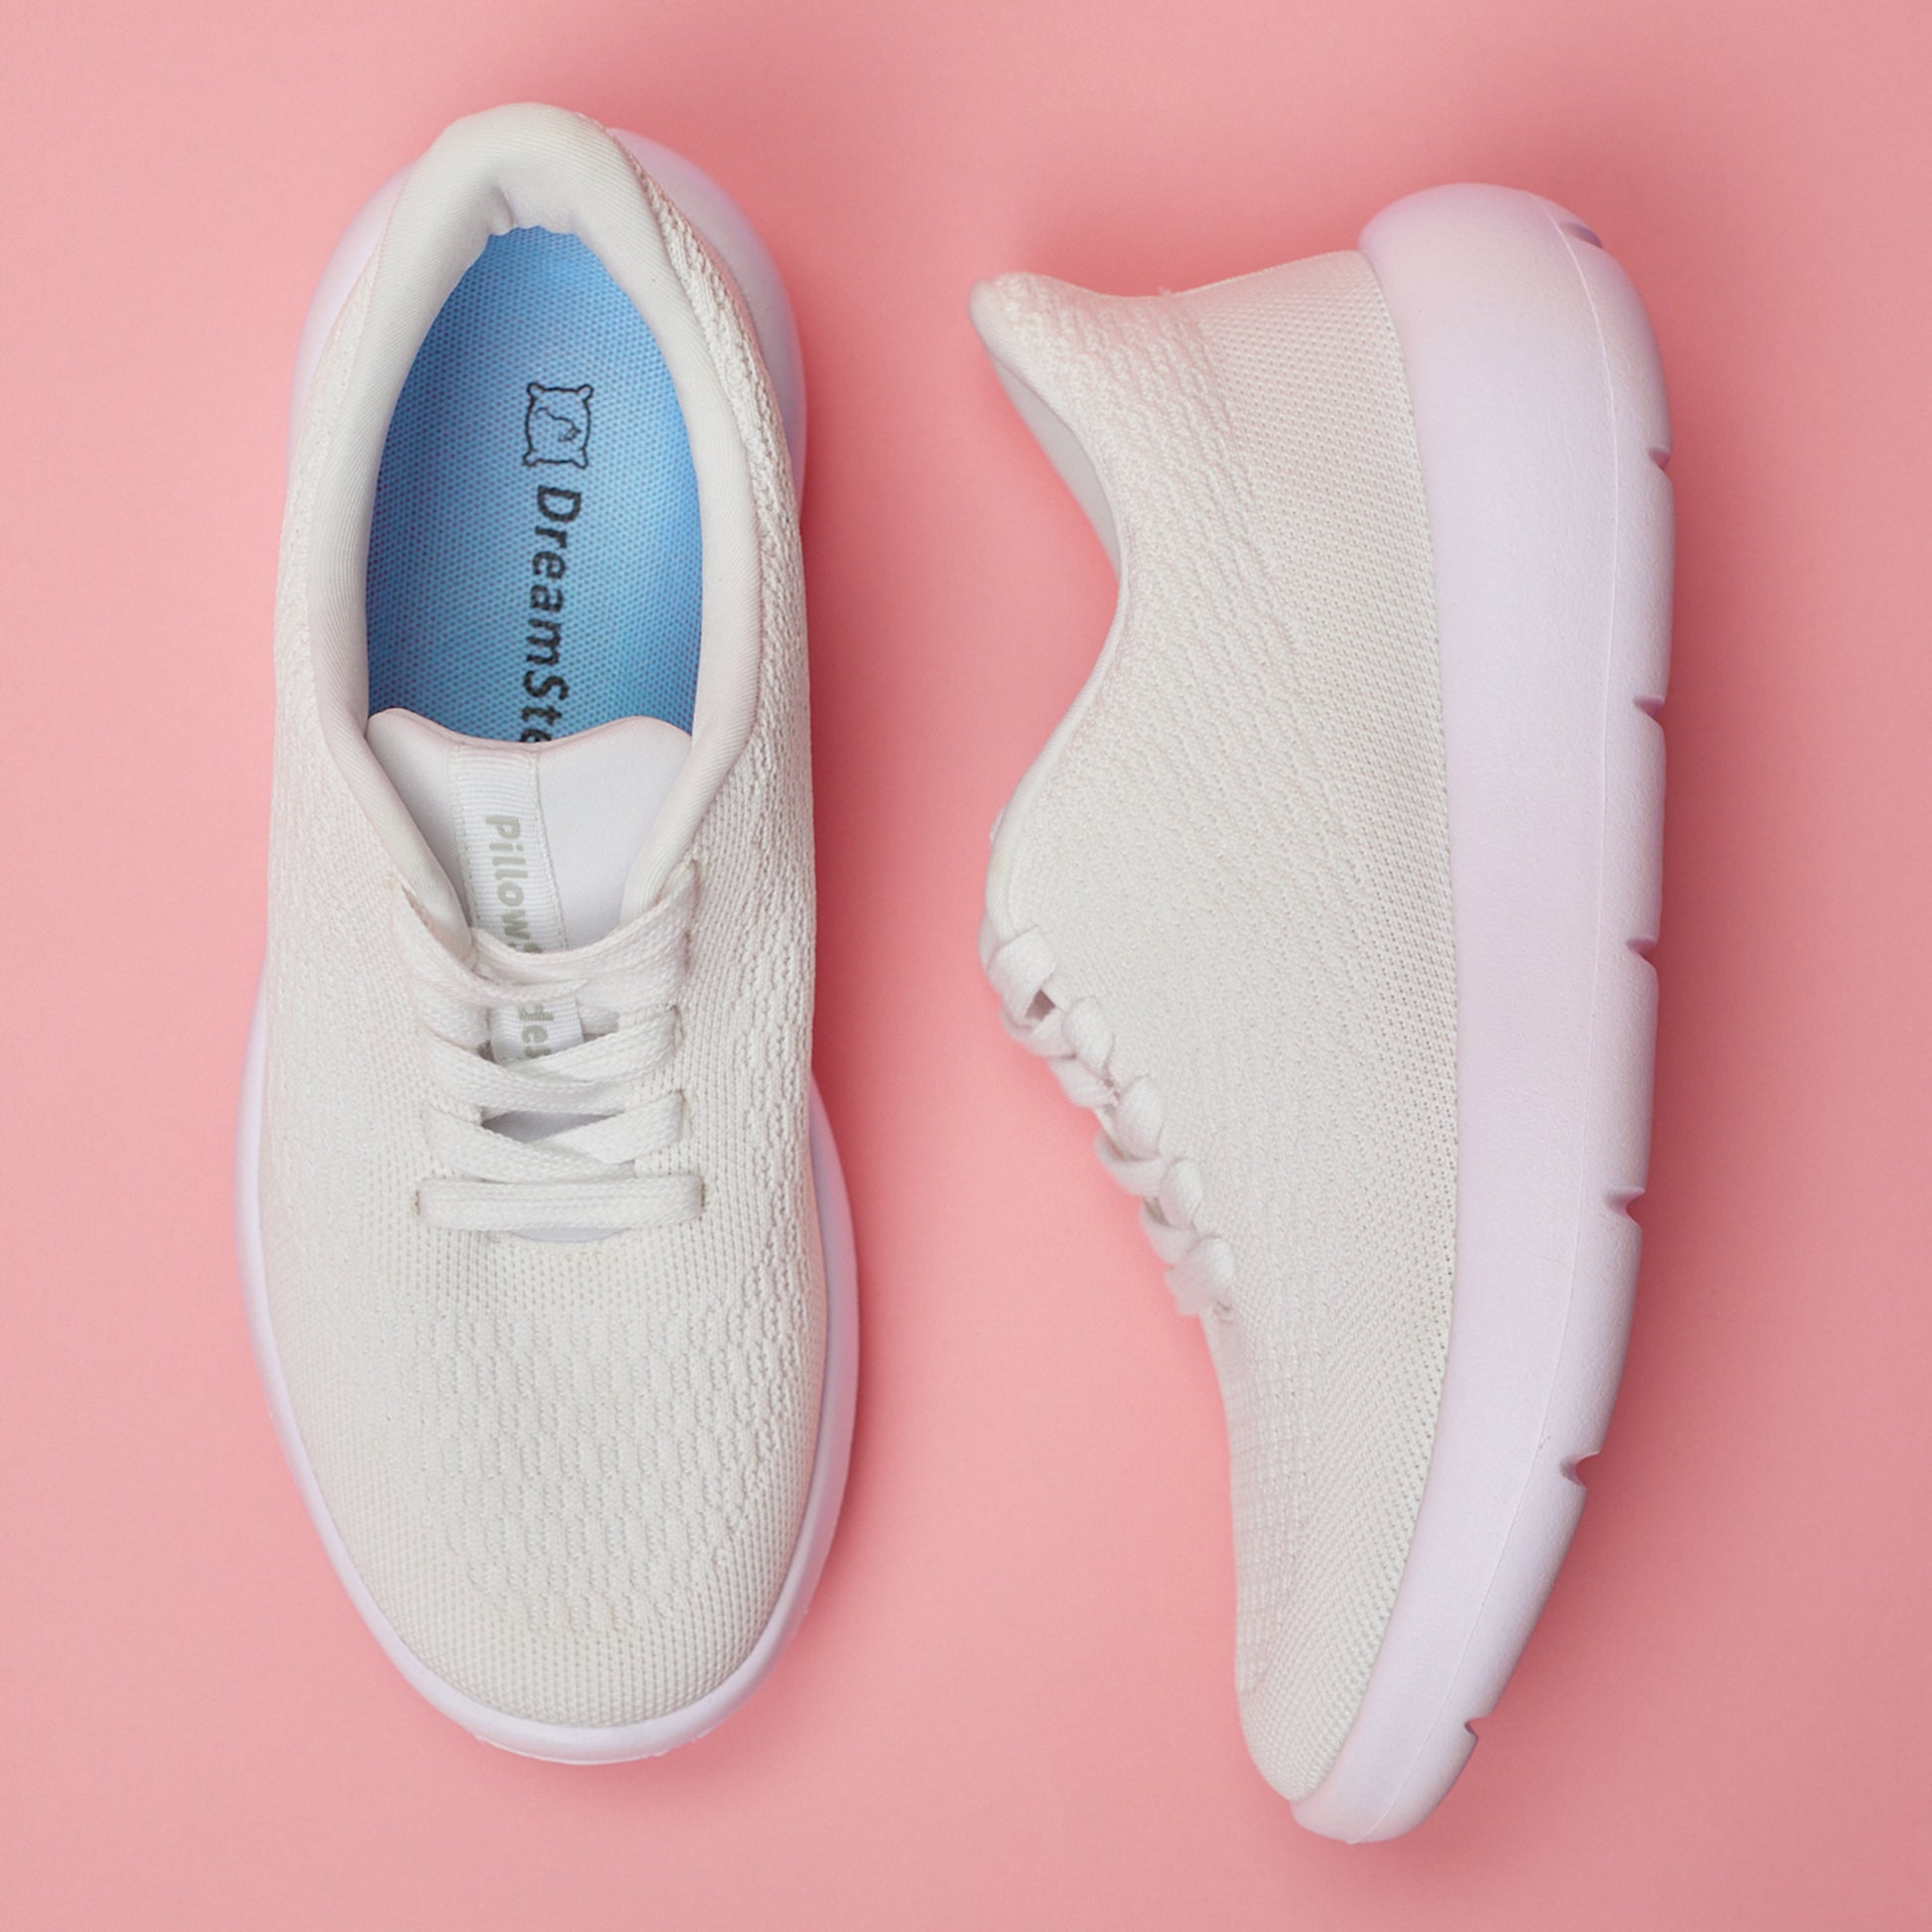 Stock white sneakers on a pink backdrop